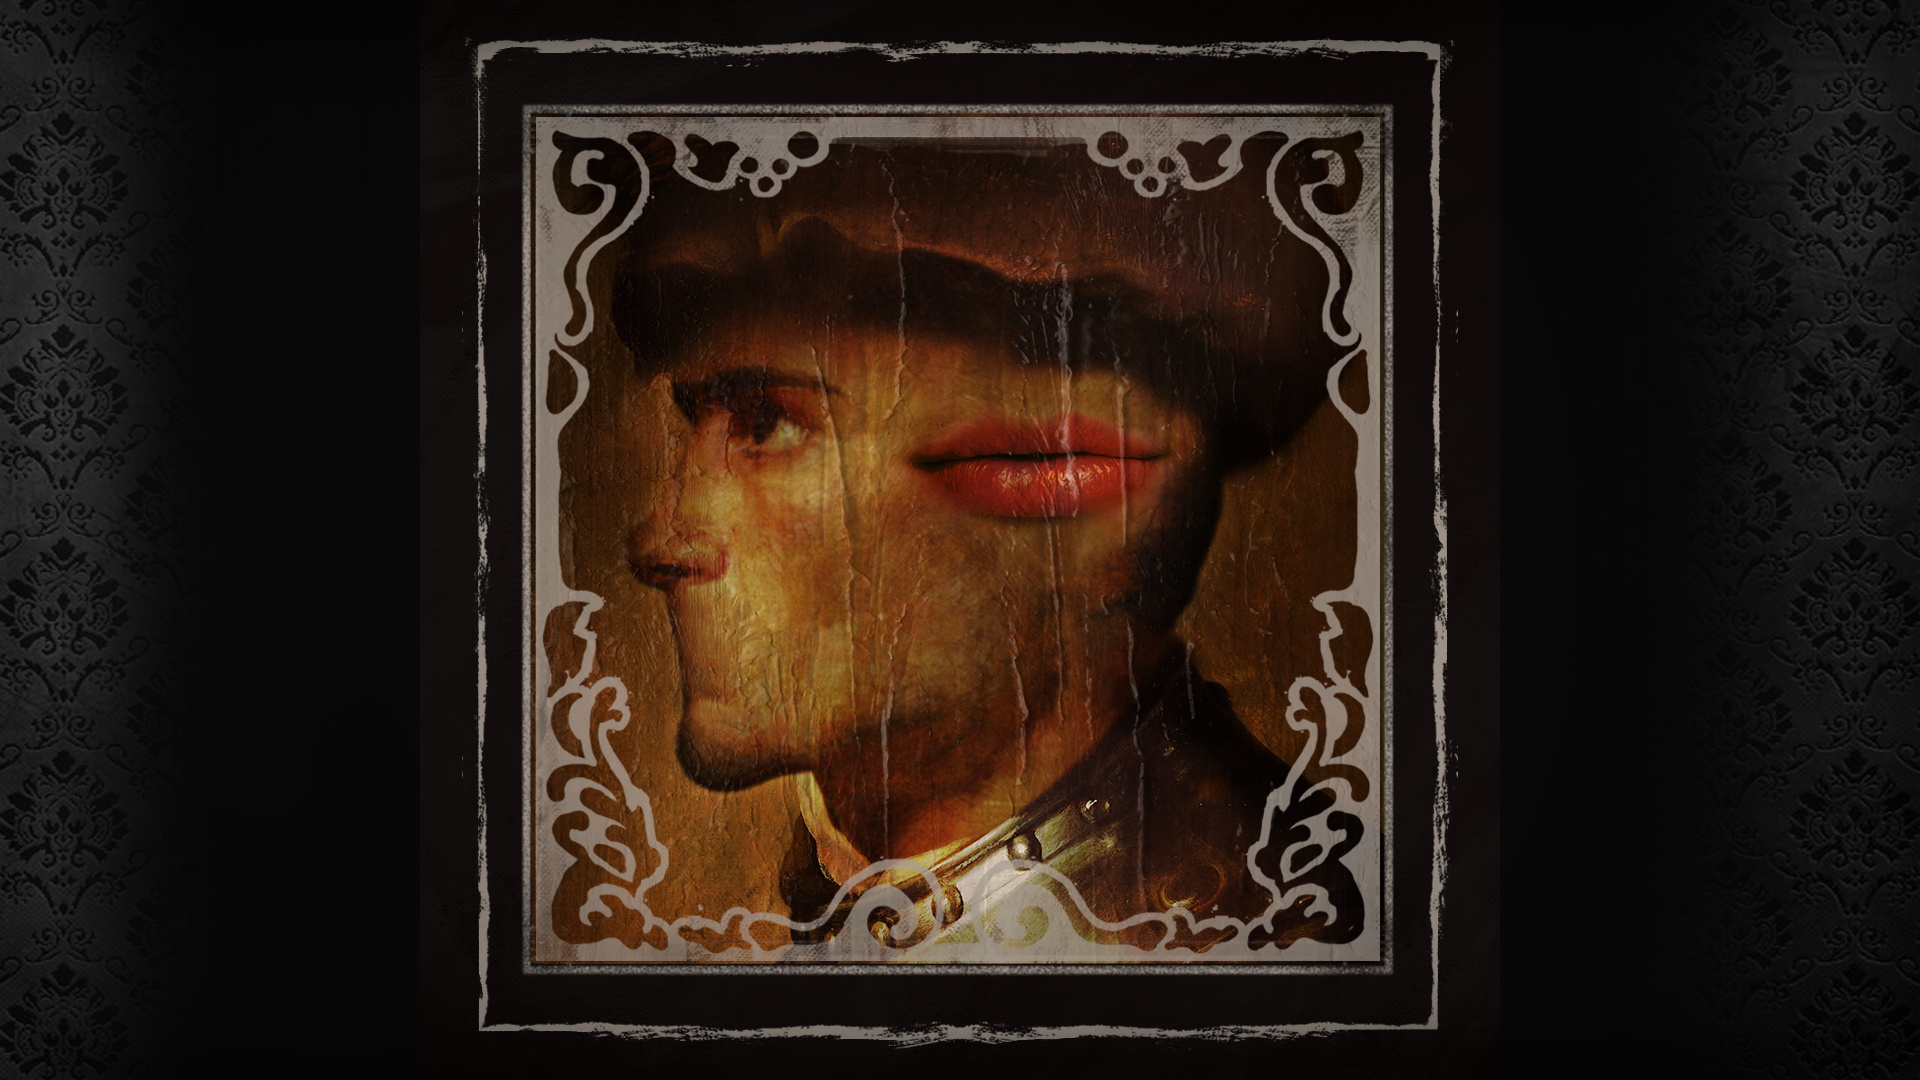 Icon for Whispers long forgotten